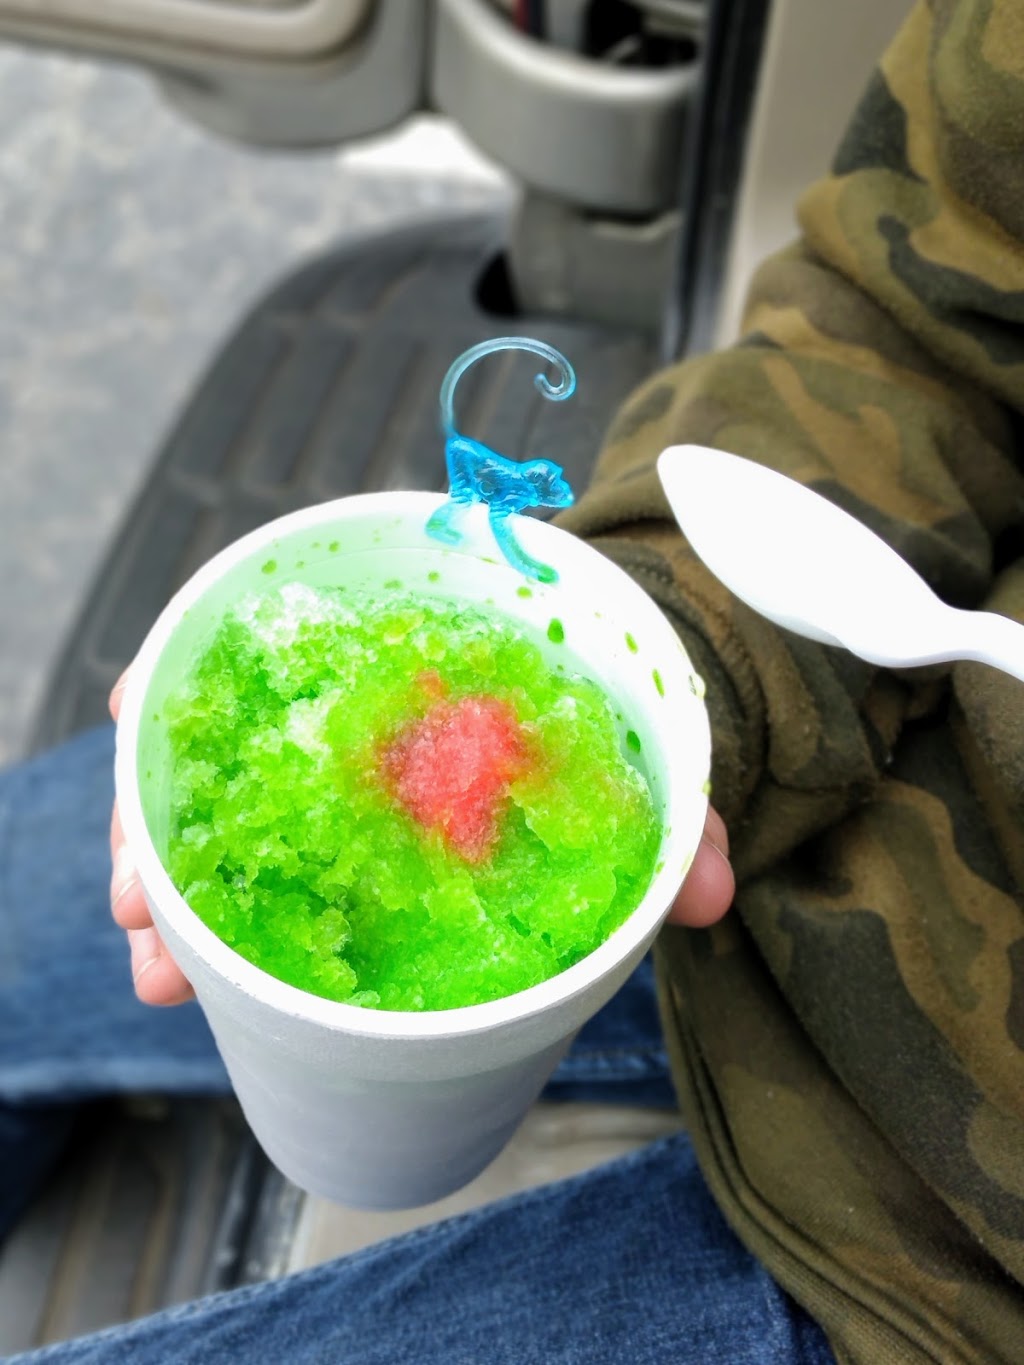 Funky Munky Shaved Ice Aledo | 10303 E Bankhead Hwy Suite 101, Aledo, TX 76008, USA | Phone: (817) 935-8774